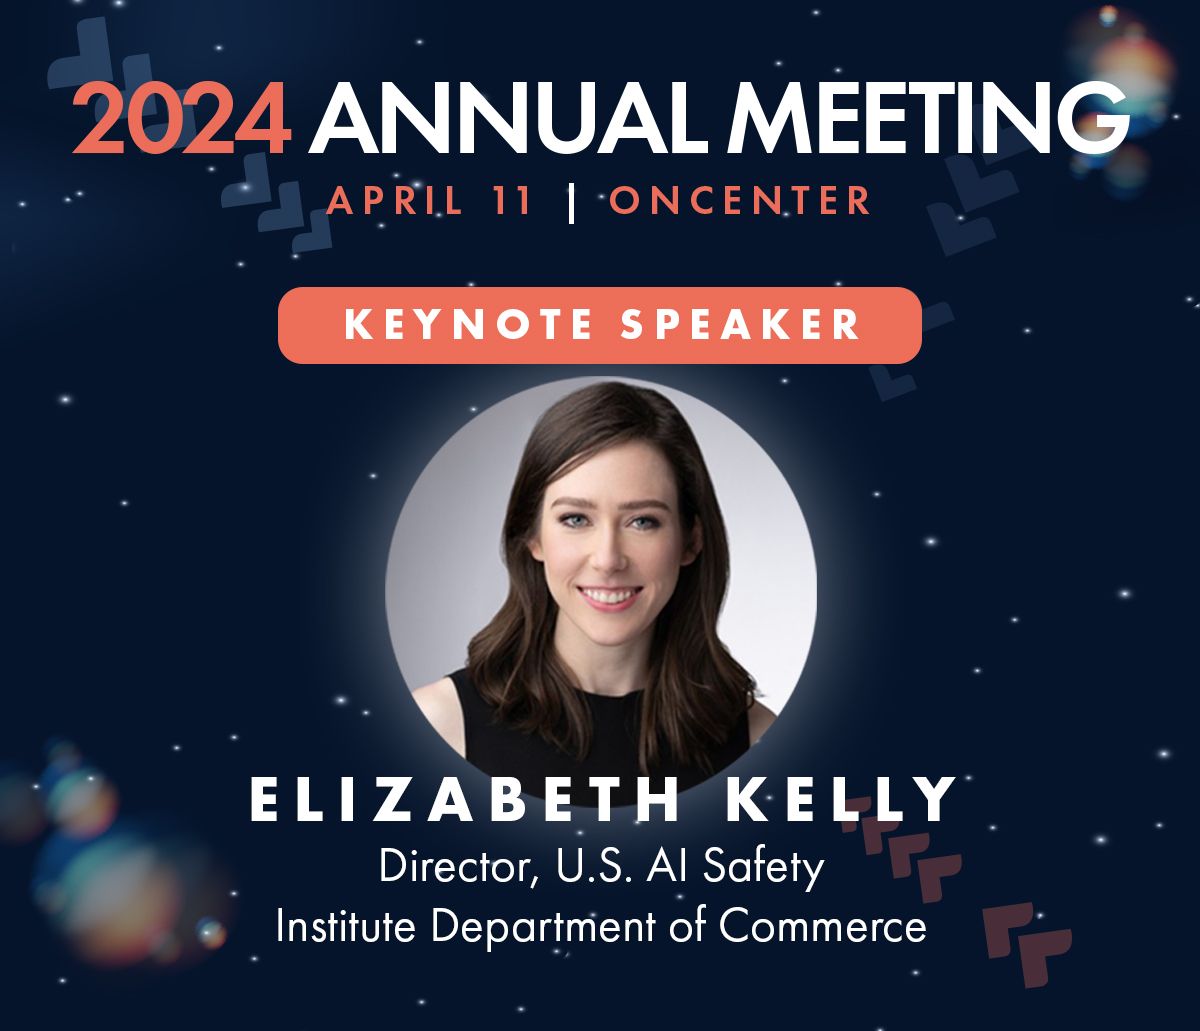 Elizabeth Kelly, the CEO of the U.S. AI Safety Institute at the National Institute of Standards and Technology (@NIST), will be our keynote speaker at CenterState CEO’s Annual Meeting on Thursday, Apr. 11, at the Oncenter. Read more and register here: bit.ly/CEOAnnualMtg24